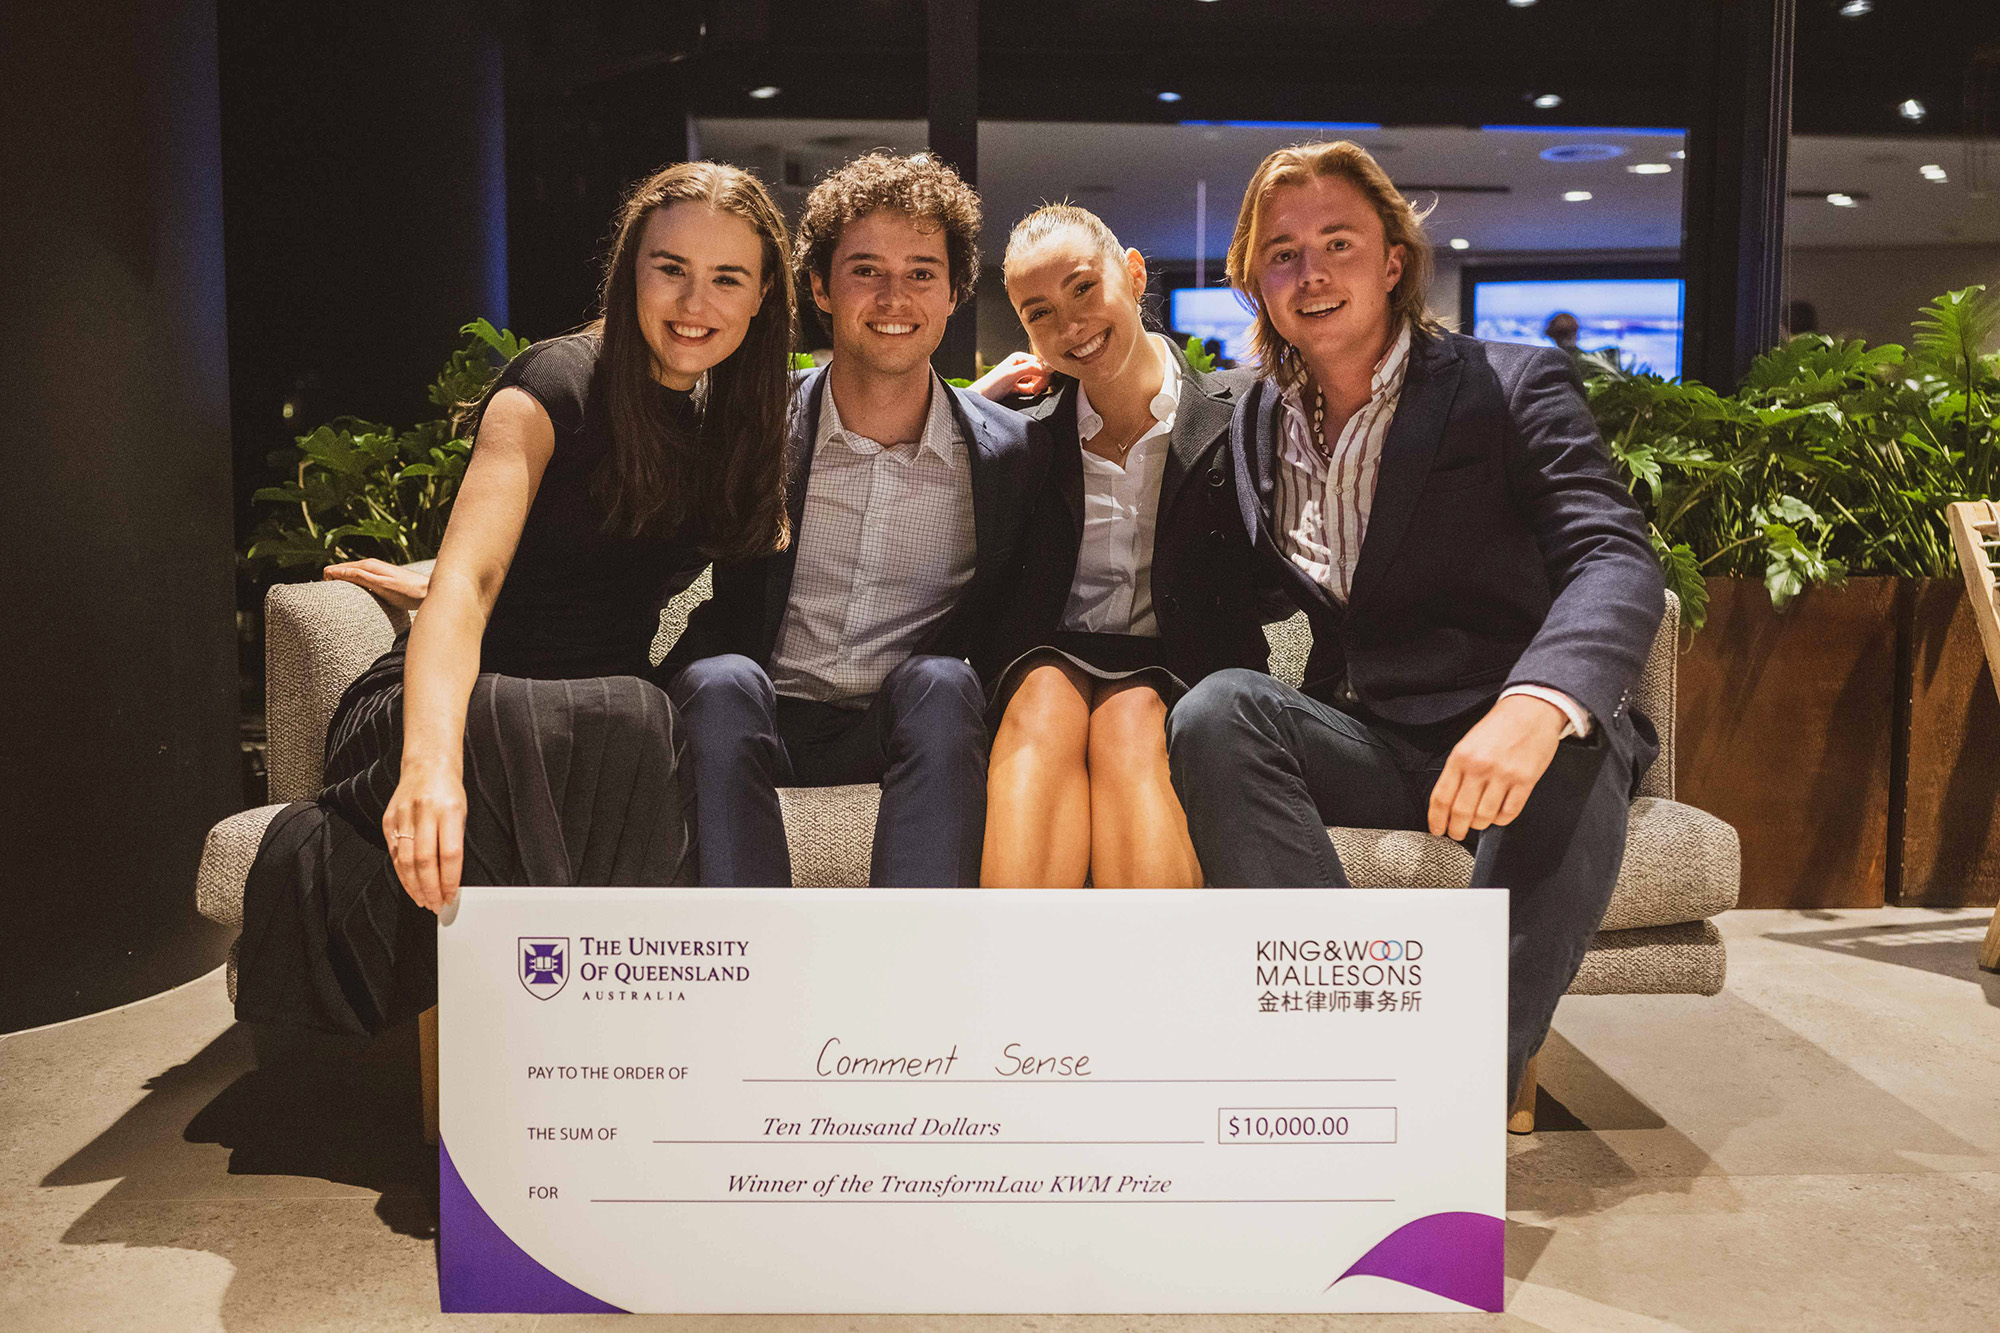 Student sitting on couch holding novelty sized cheque